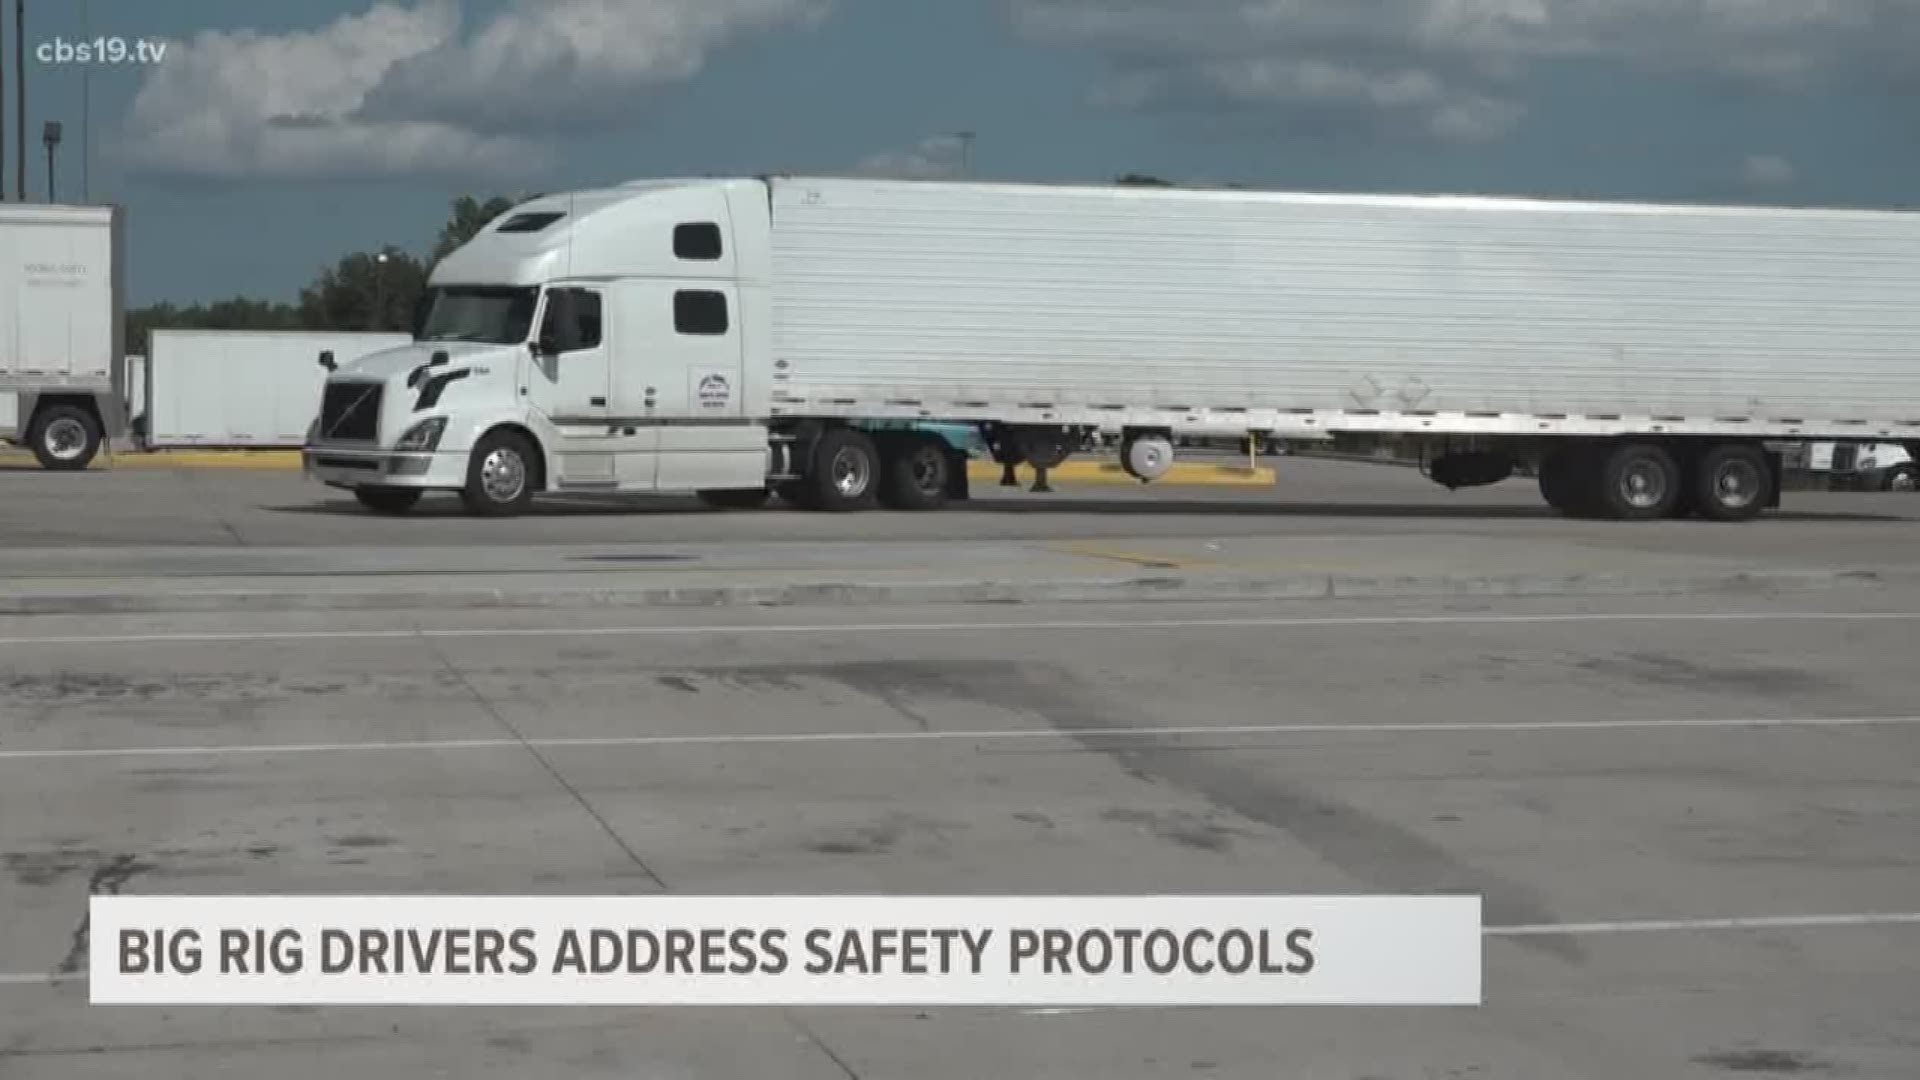 Truck drivers are aware of the danger of their vehicles. Many take advantage of the safety features available, but all agree drivers must share the road.